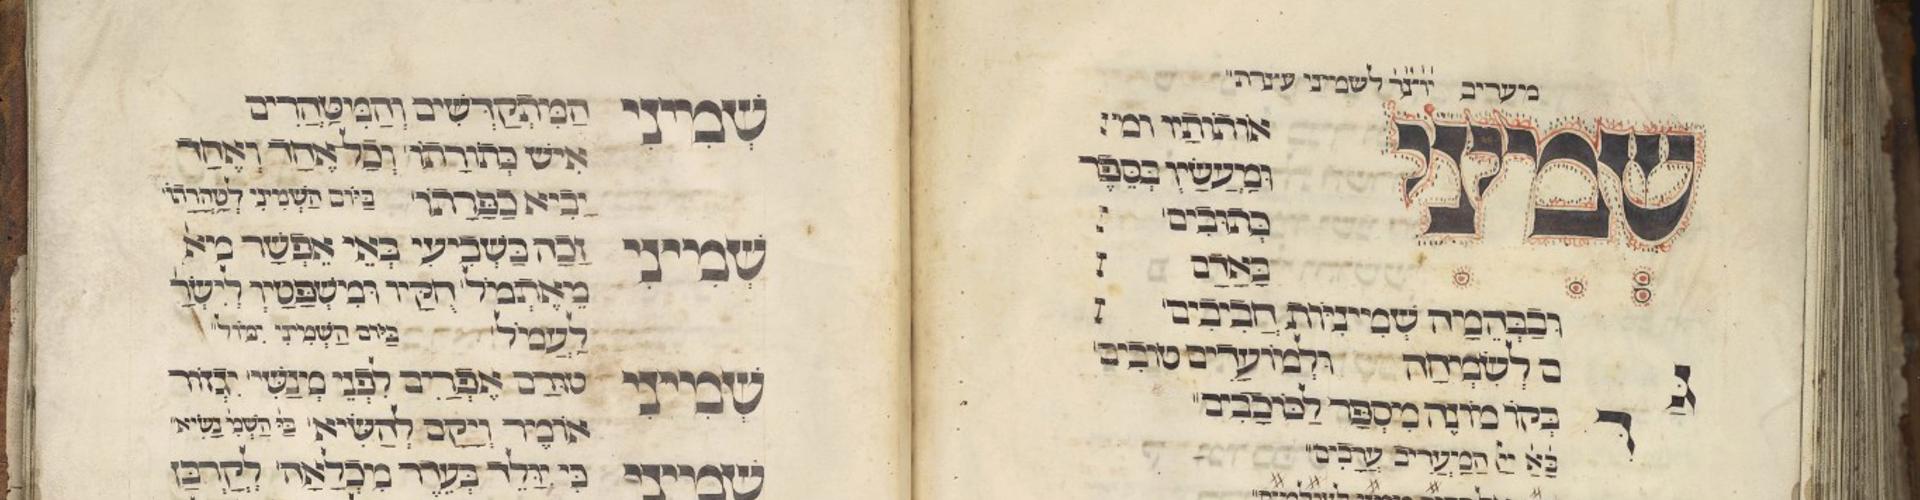 manuscript close-up with Hebrew word "Shmini" adorned with marks